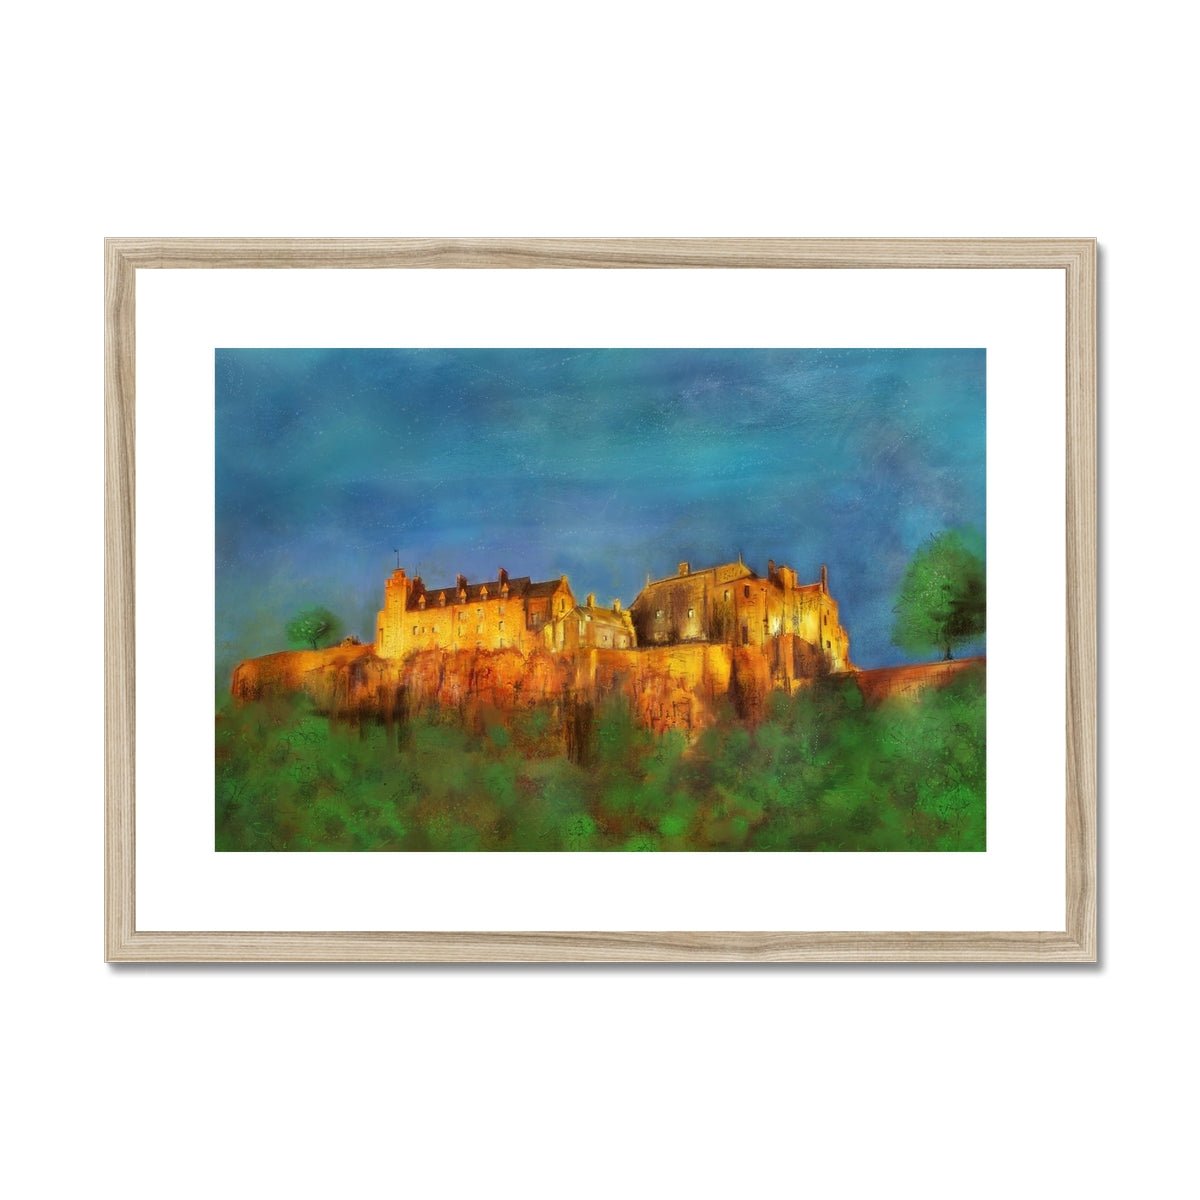 Stirling Castle Painting | Framed & Mounted Prints From Scotland-Framed & Mounted Prints-Historic & Iconic Scotland Art Gallery-A2 Landscape-Natural Frame-Paintings, Prints, Homeware, Art Gifts From Scotland By Scottish Artist Kevin Hunter